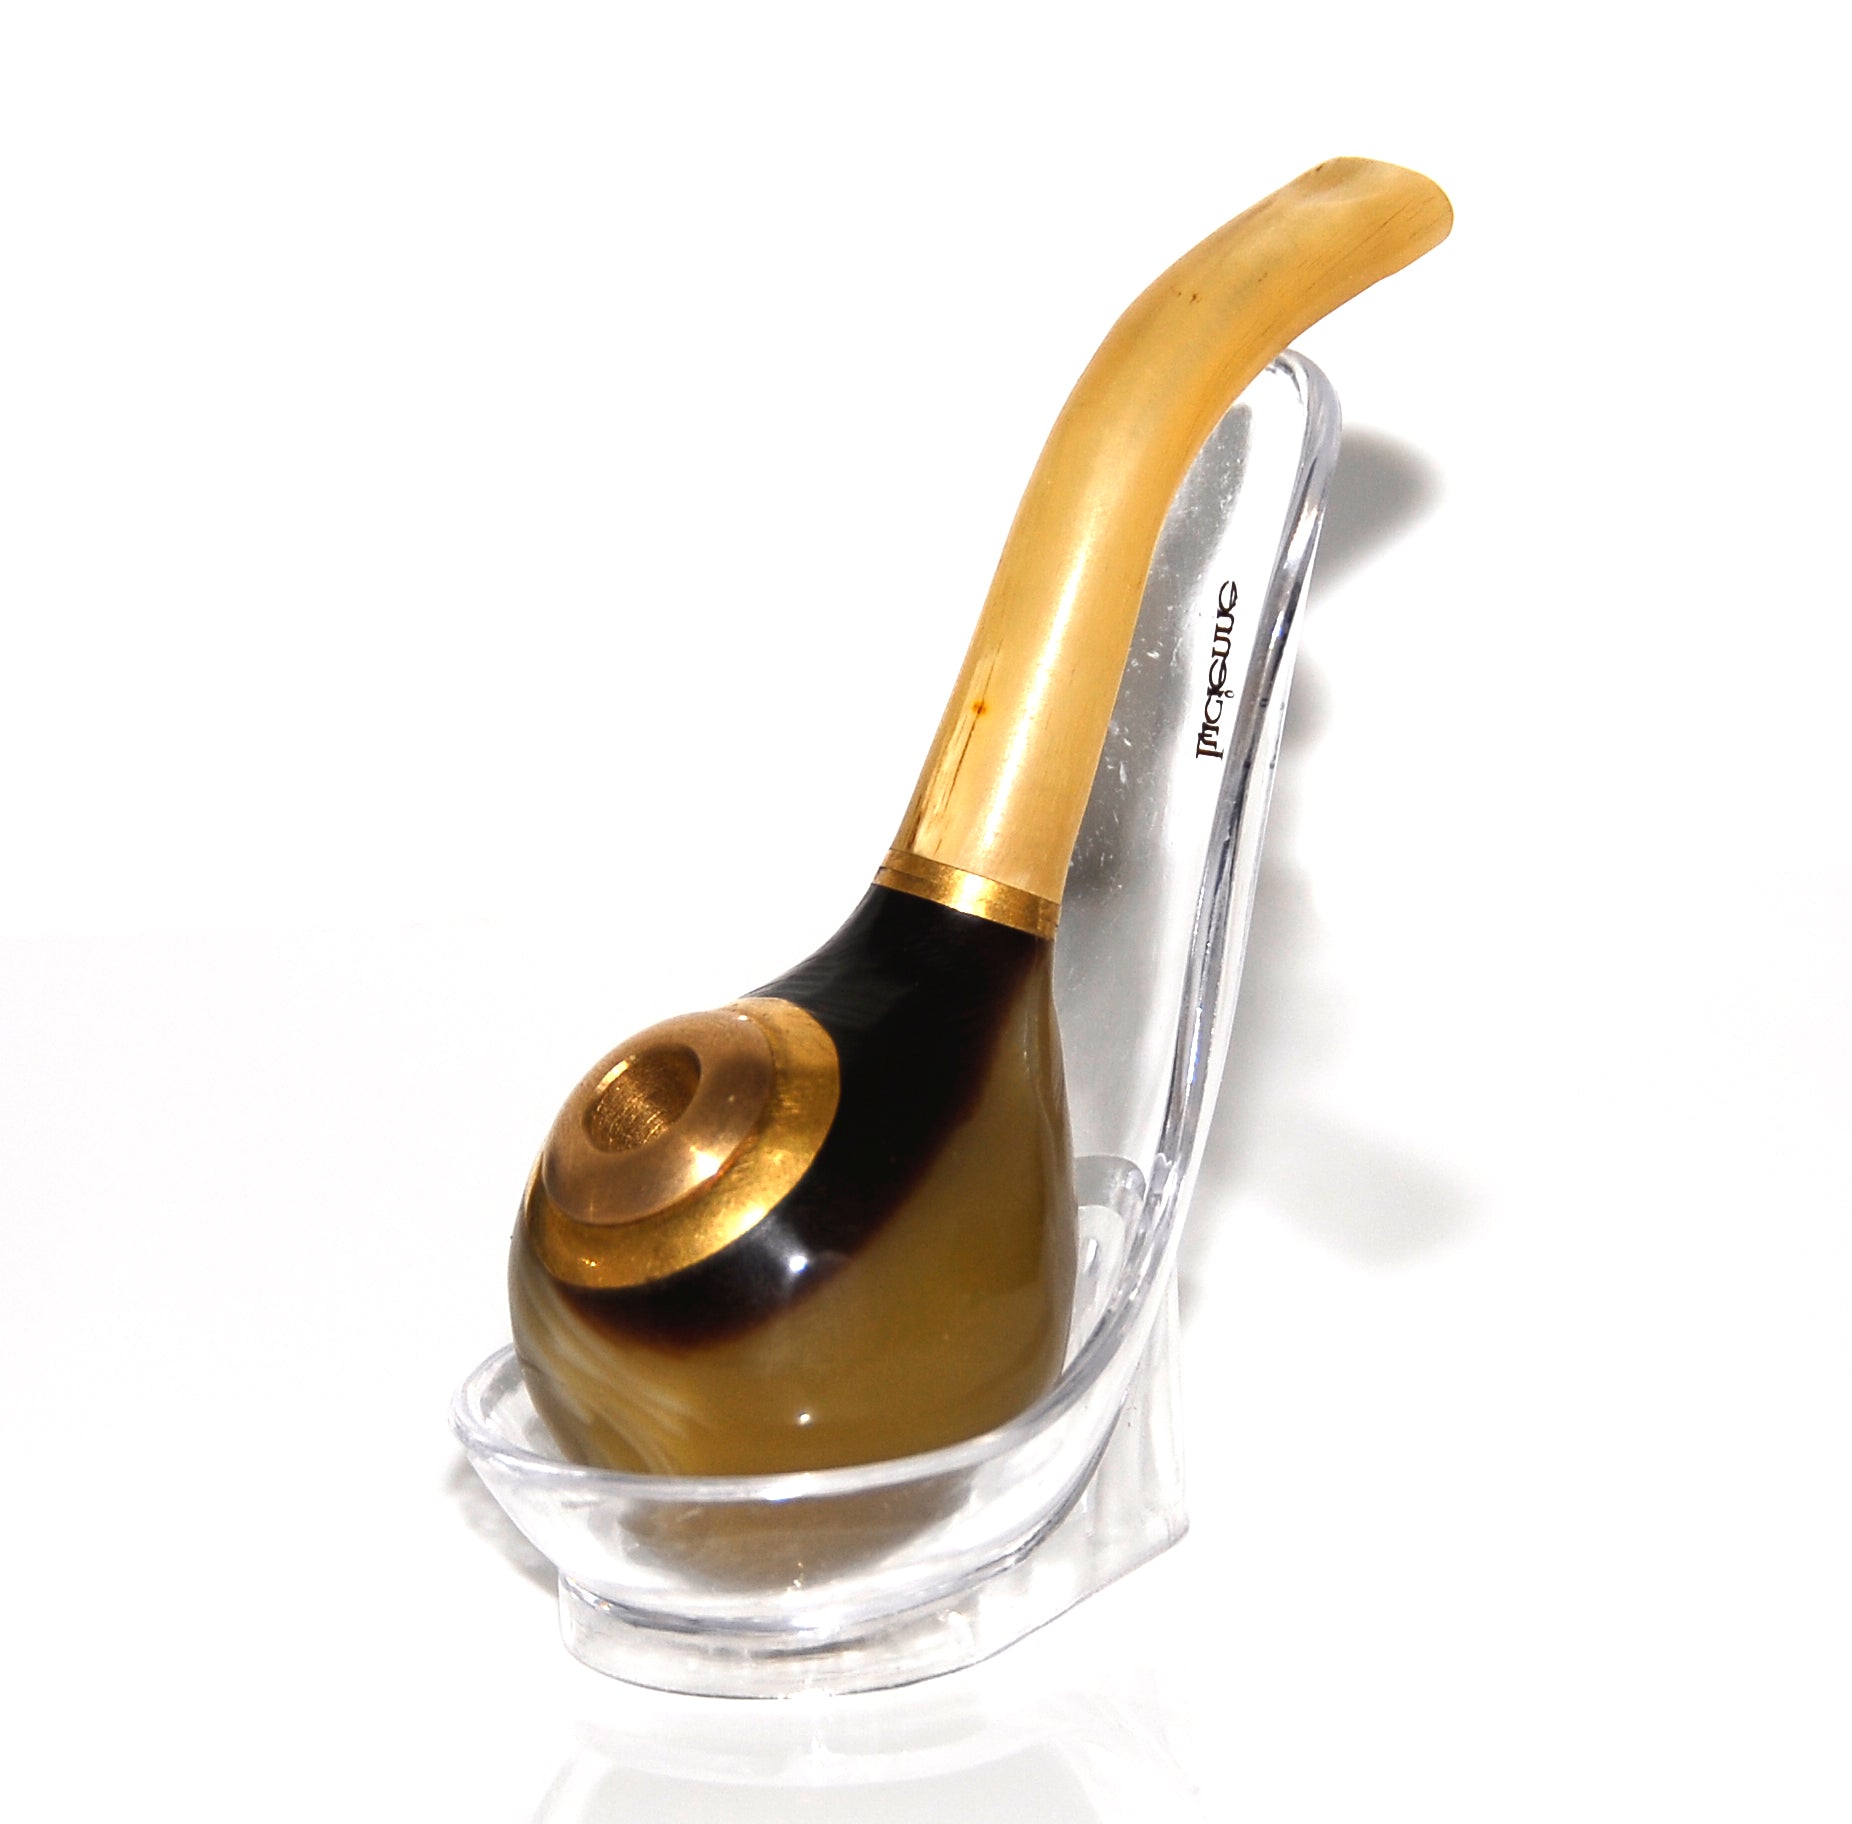 Short Horn Style Tobacco Pipe, soild Quality, Easy to Carry with Cigarette adapter, Assorted Pattern